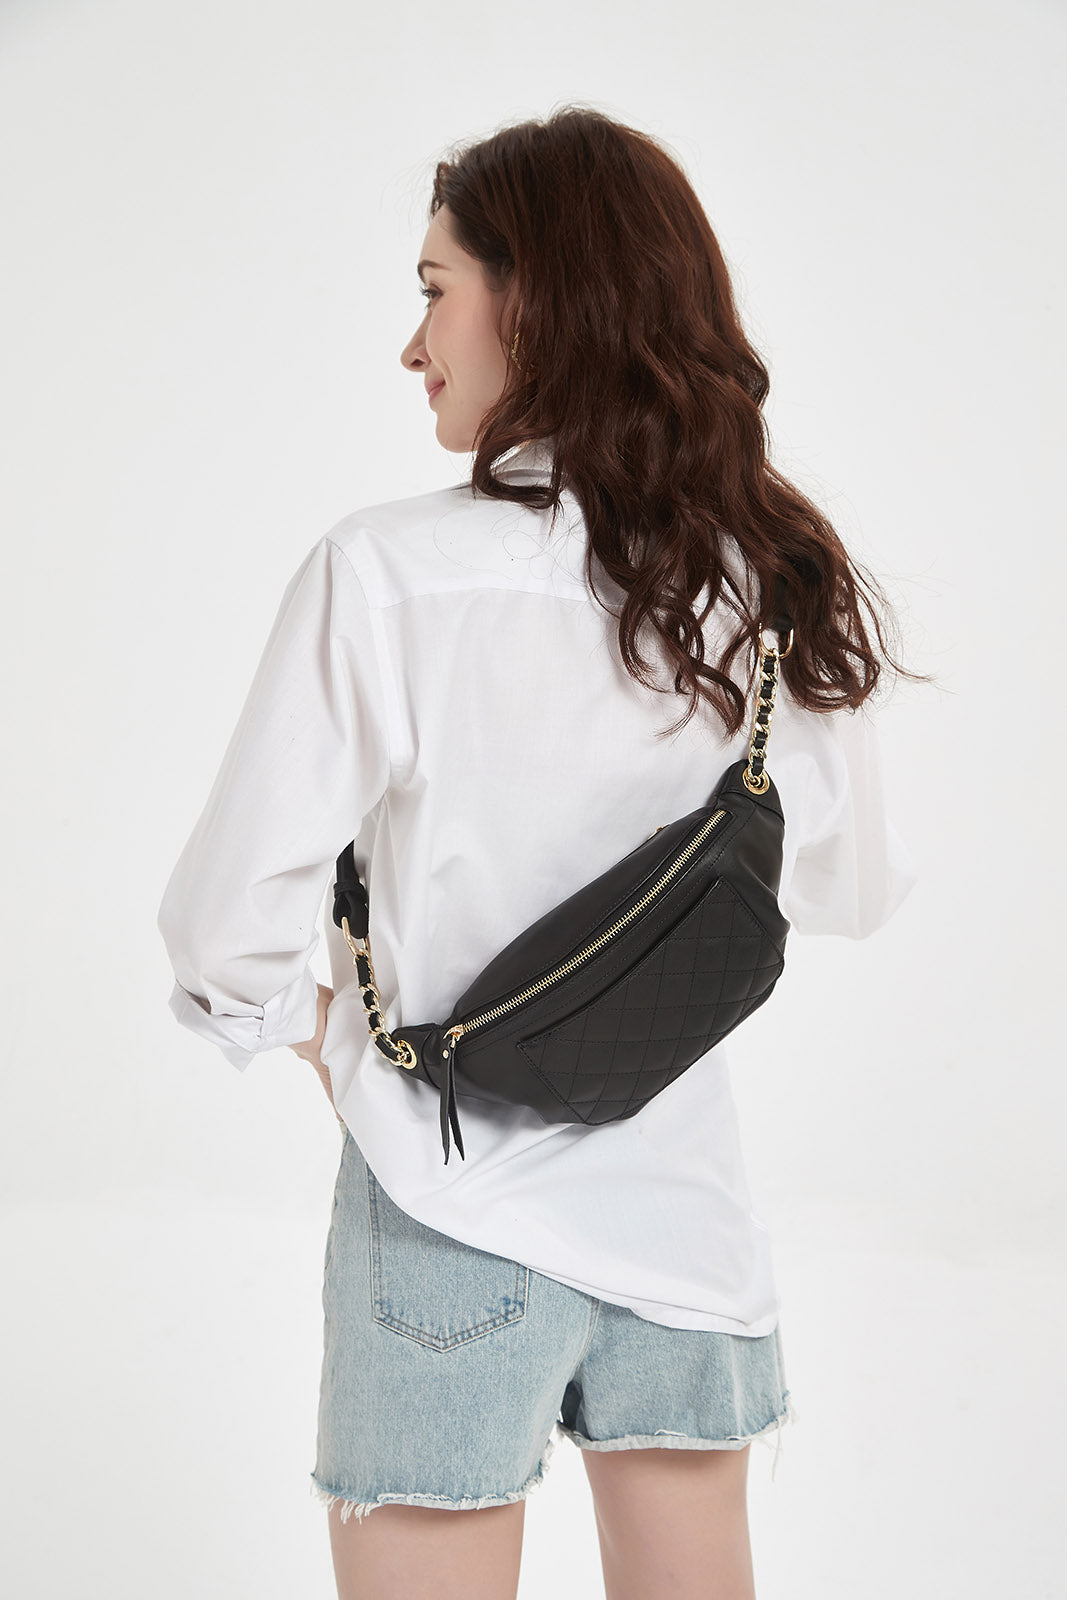 HIMODA quilted fanny pack - black leather - details 3